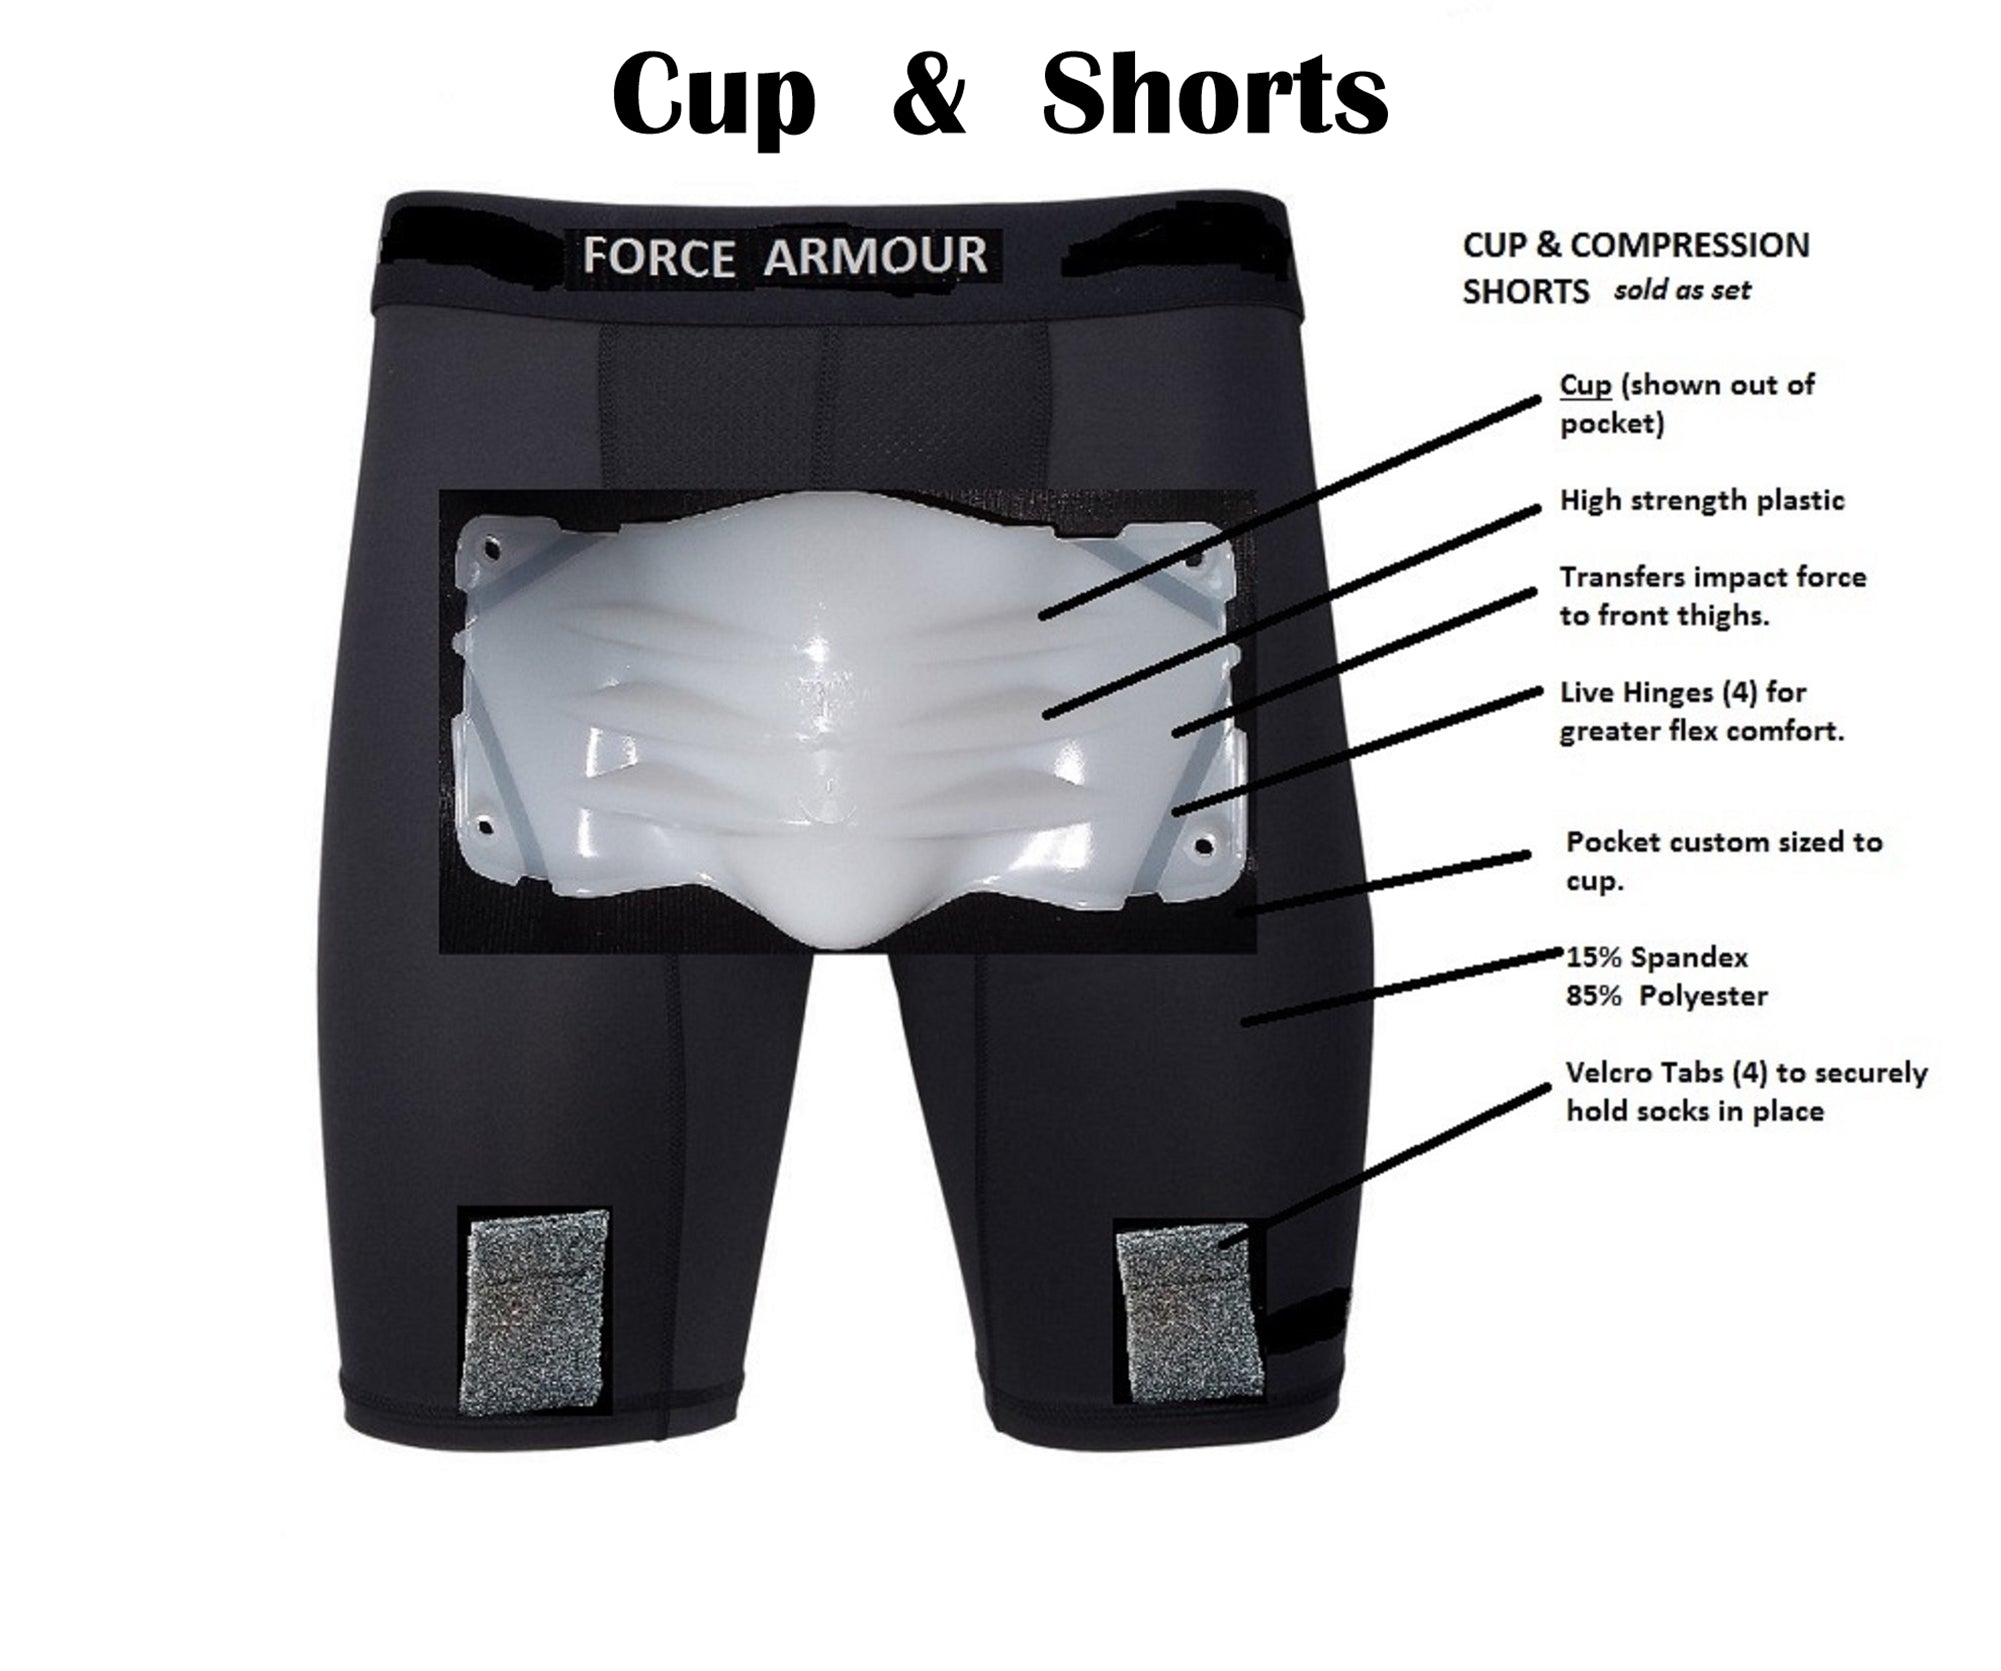 Force Armour Athletic Cup and Compression Shorts Combo Pack (cup shown –